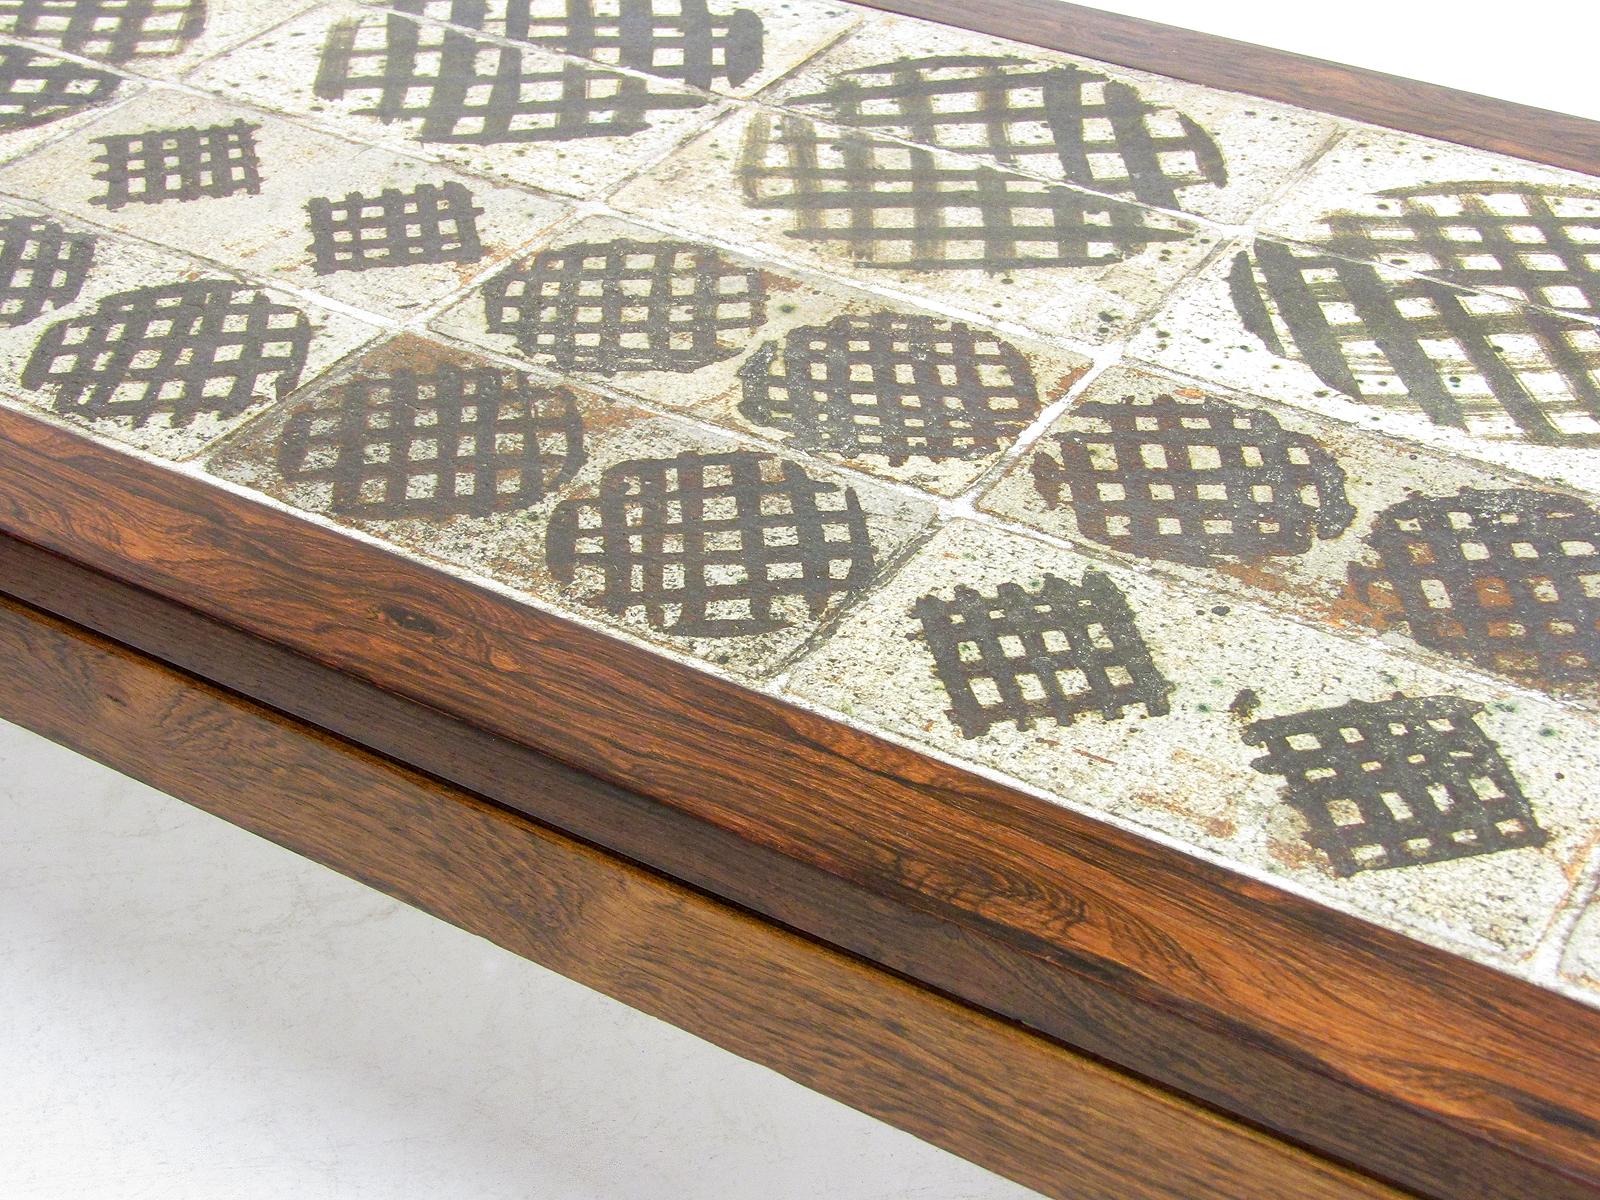 Large 1970s Danish Art Tile Coffee Table in Rosewood by Tue Poulsen & Eric Wörtz For Sale 1